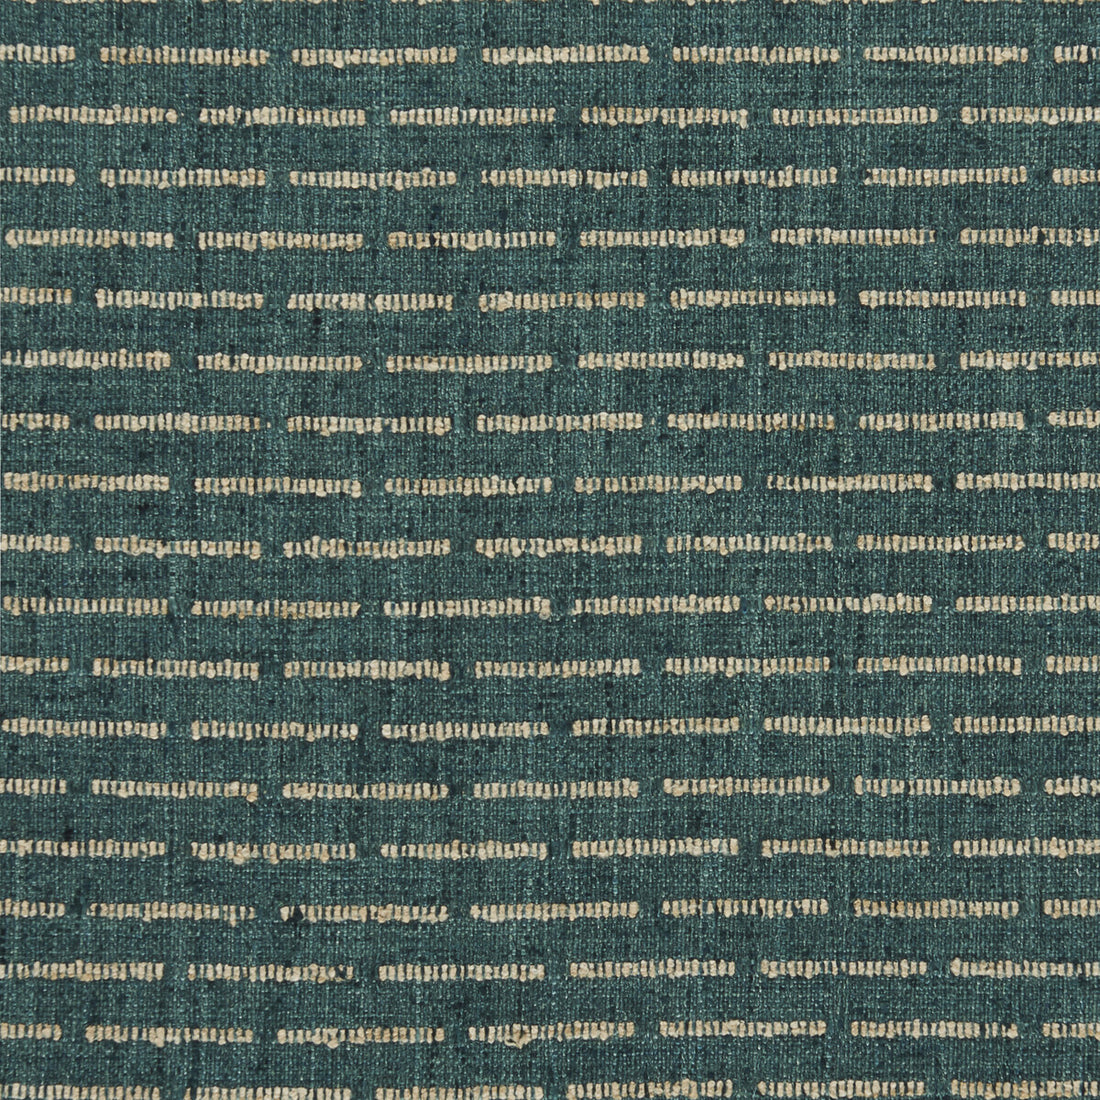 Kravet Basics fabric in 36528-316 color - pattern 36528.316.0 - by Kravet Basics in the Bungalow Chic II collection